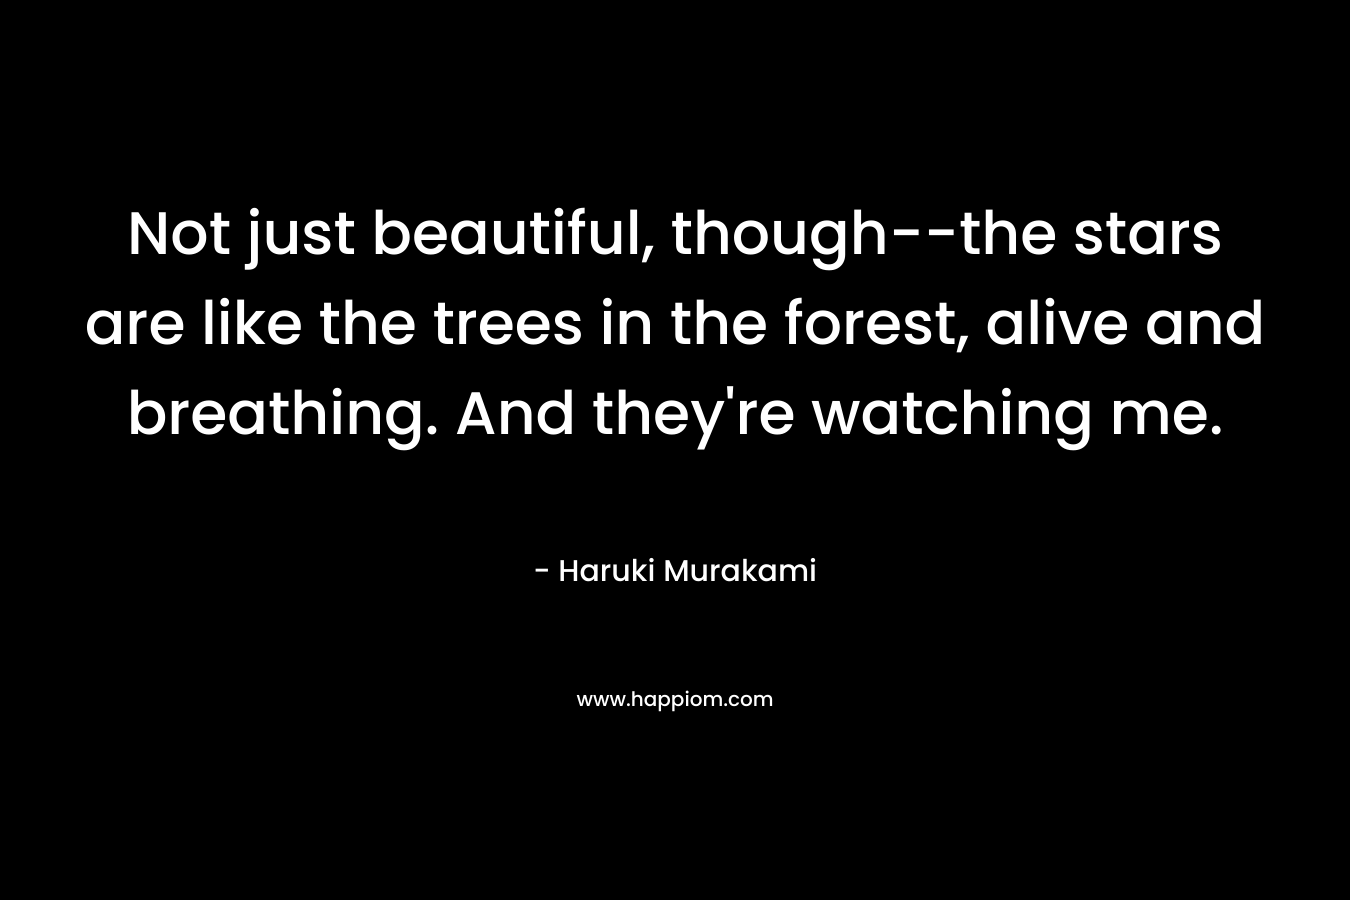 Not just beautiful, though--the stars are like the trees in the forest, alive and breathing. And they're watching me.